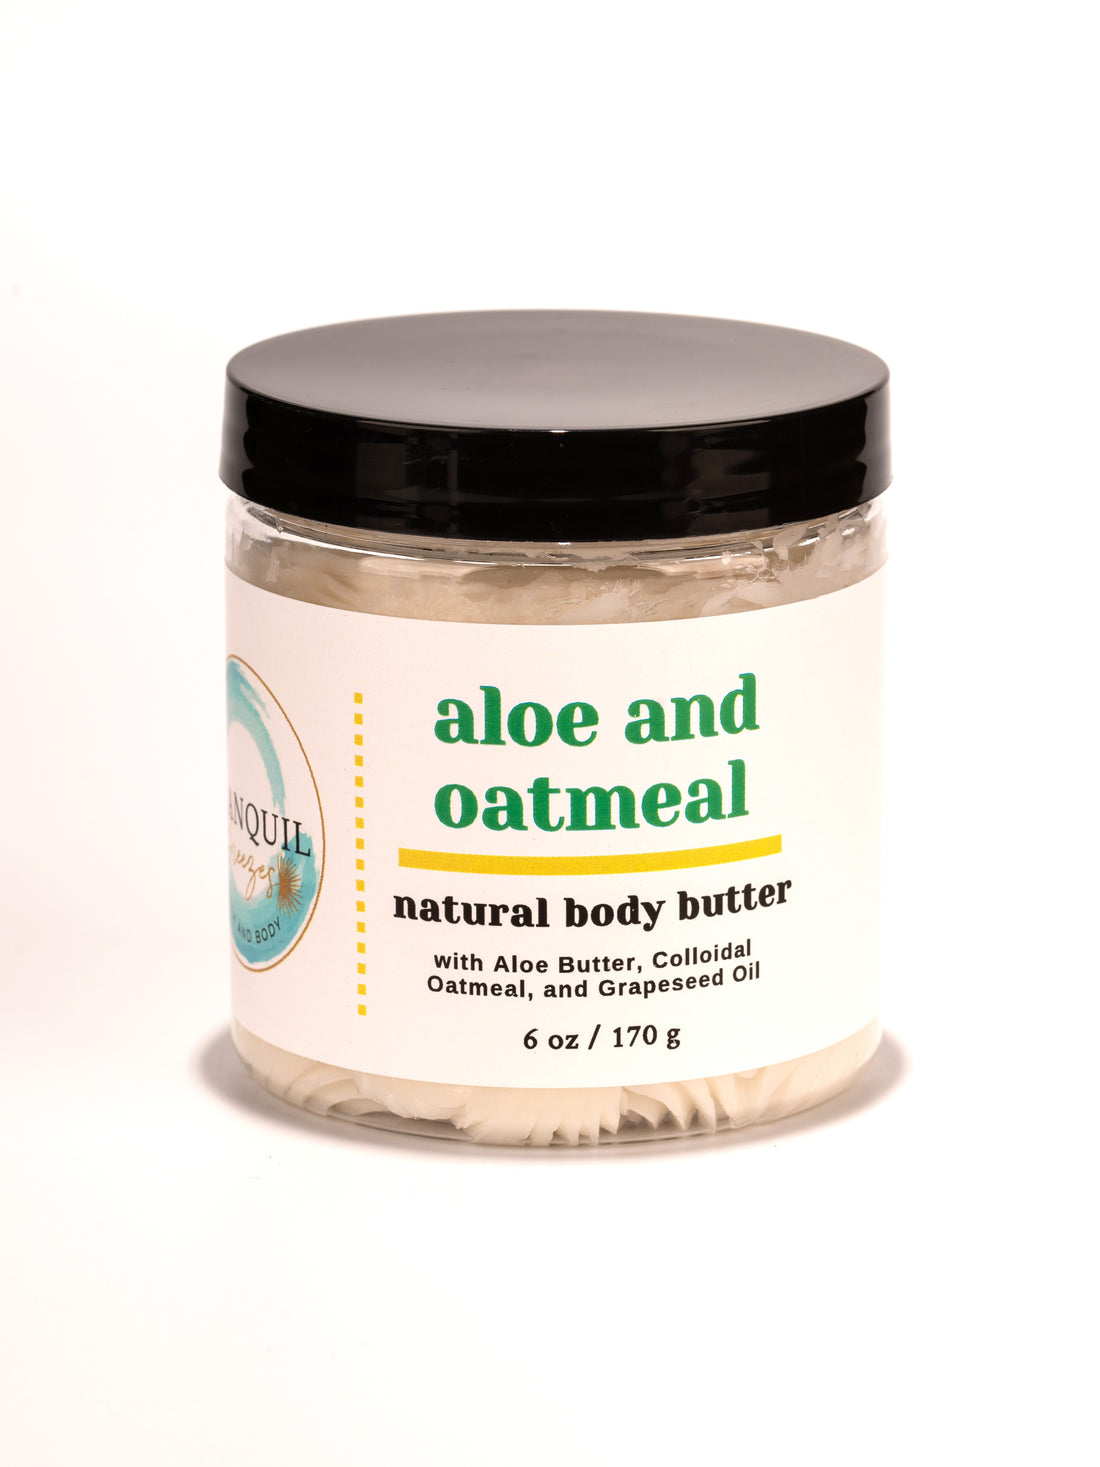 Aloe and Oatmeal Natural Body Butter